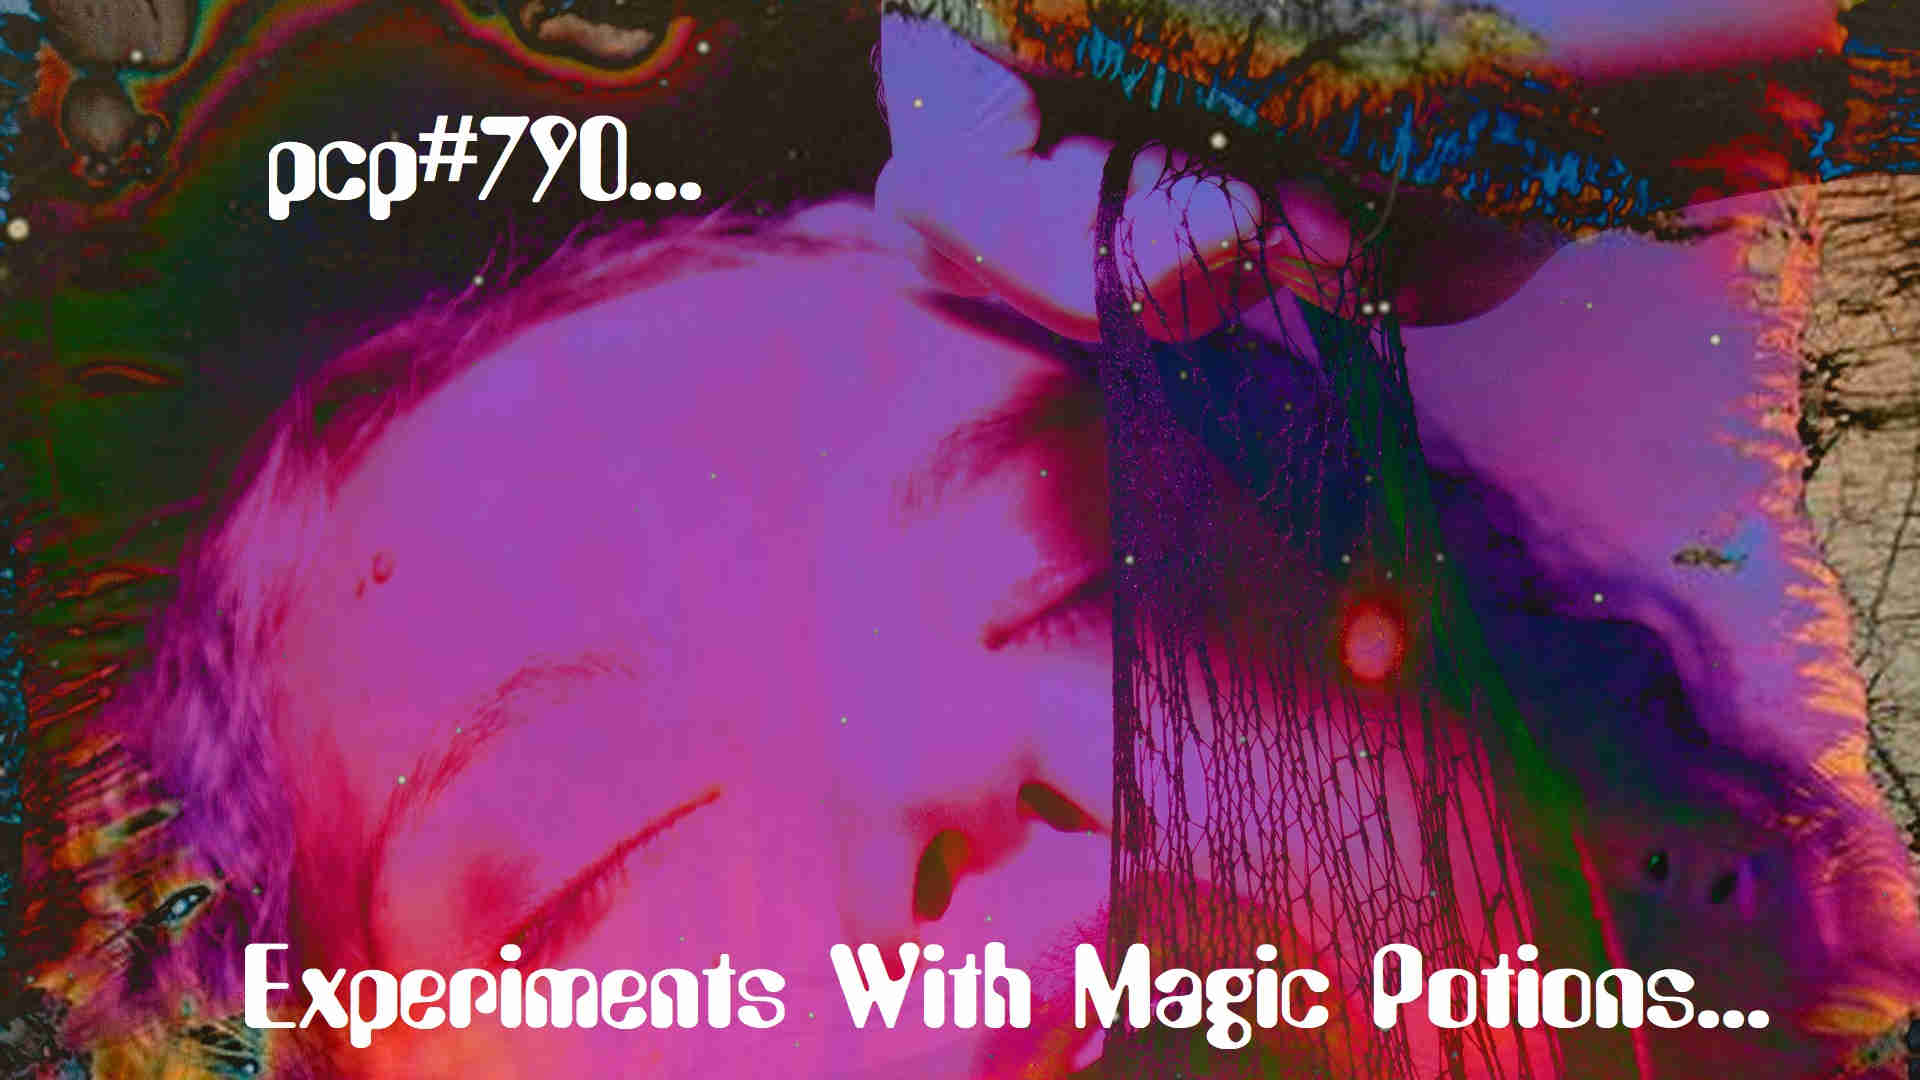 PCP#790... Experiments With Magic Potions...